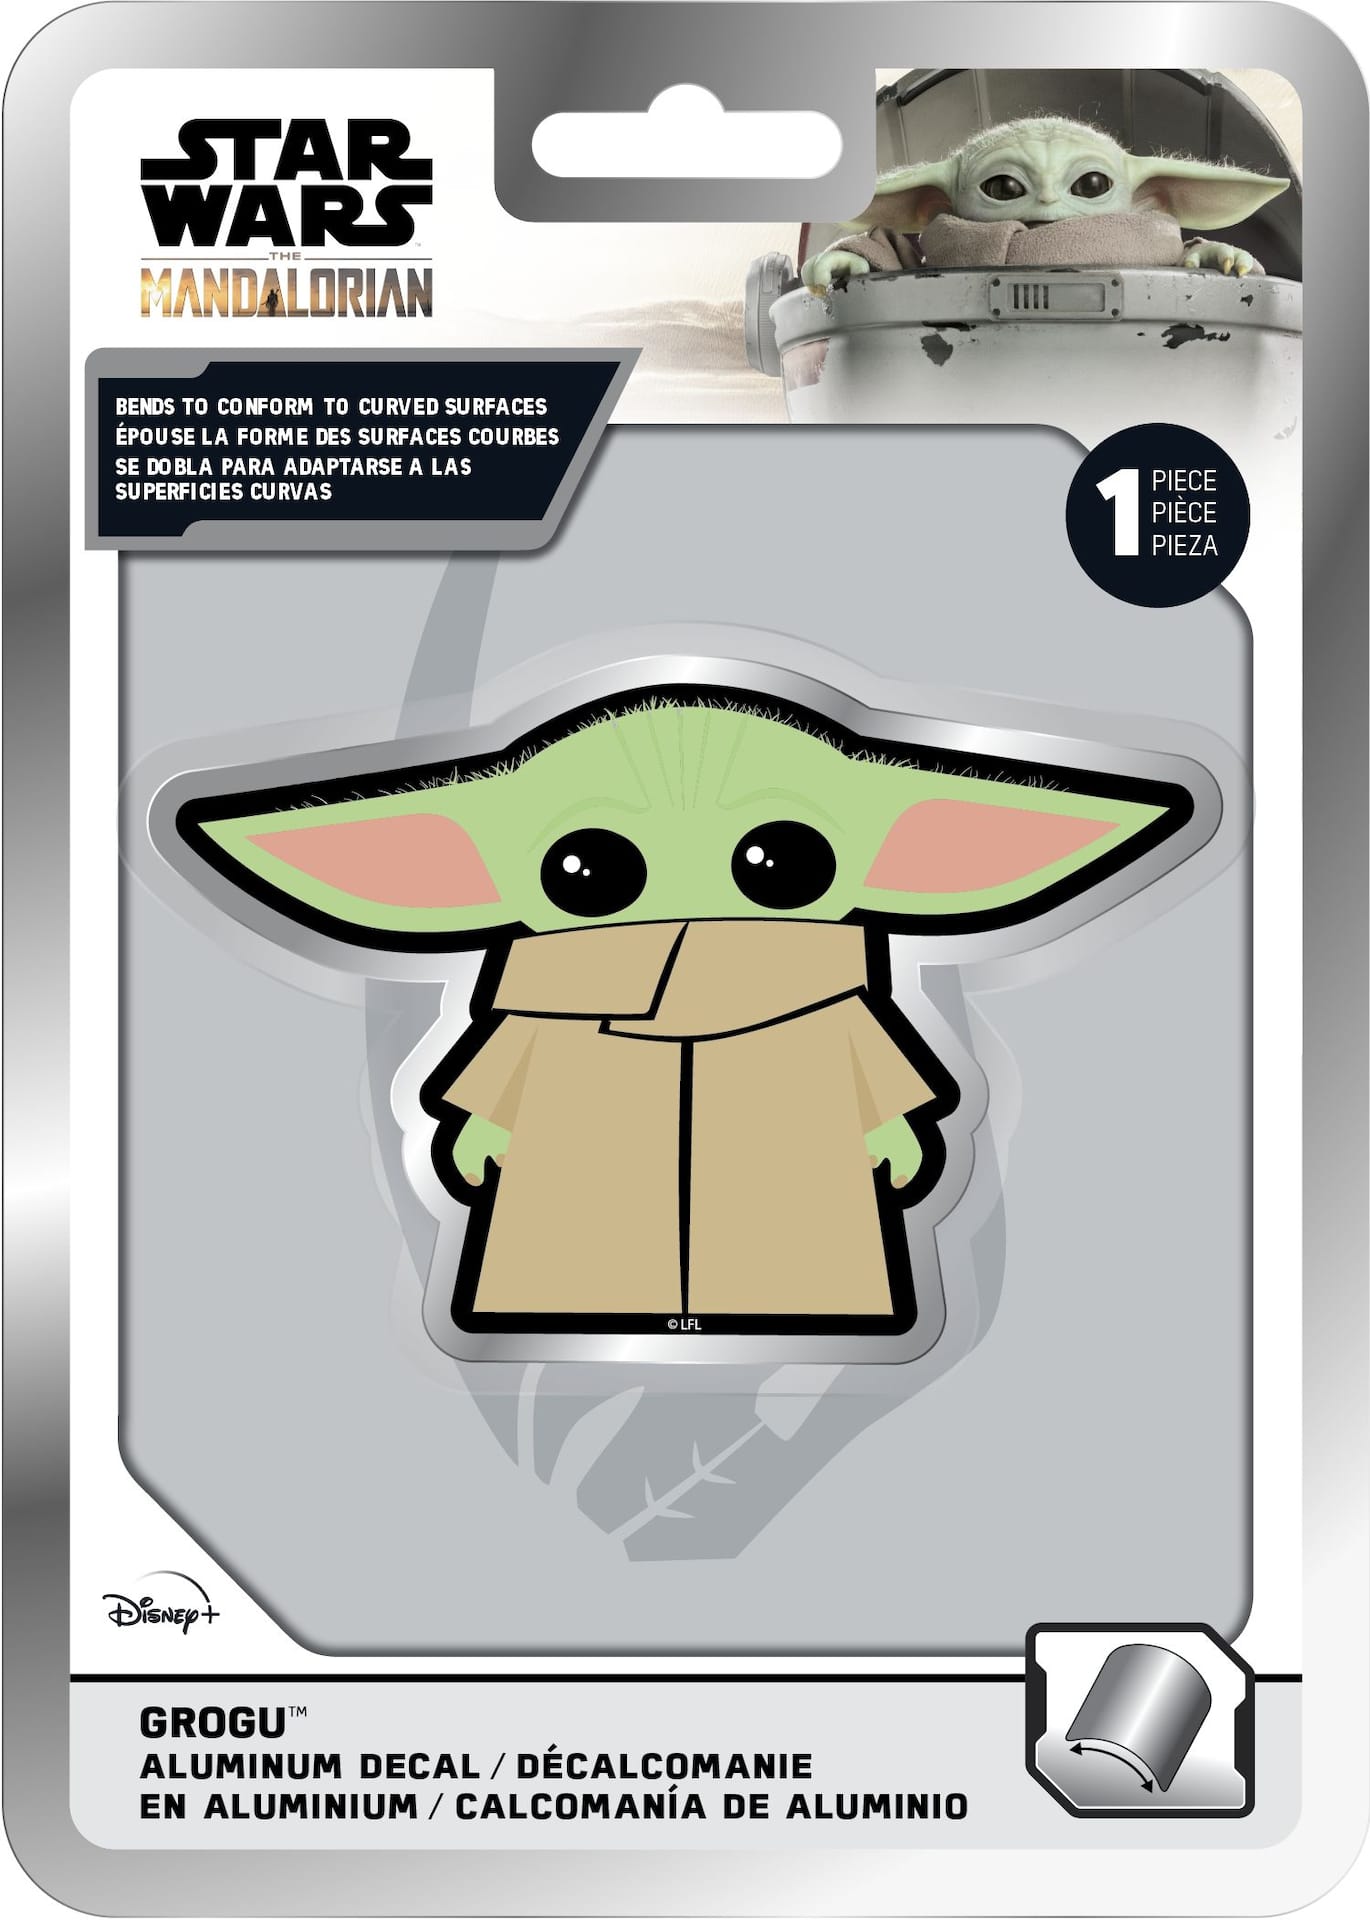 https://media-www.canadiantire.ca/product/automotive/car-care-accessories/auto-accessories/0372909/1-piece-baby-yoda-aluminum-decal-f3f41859-1b98-431a-9cf0-3596f1374209-jpgrendition.jpg